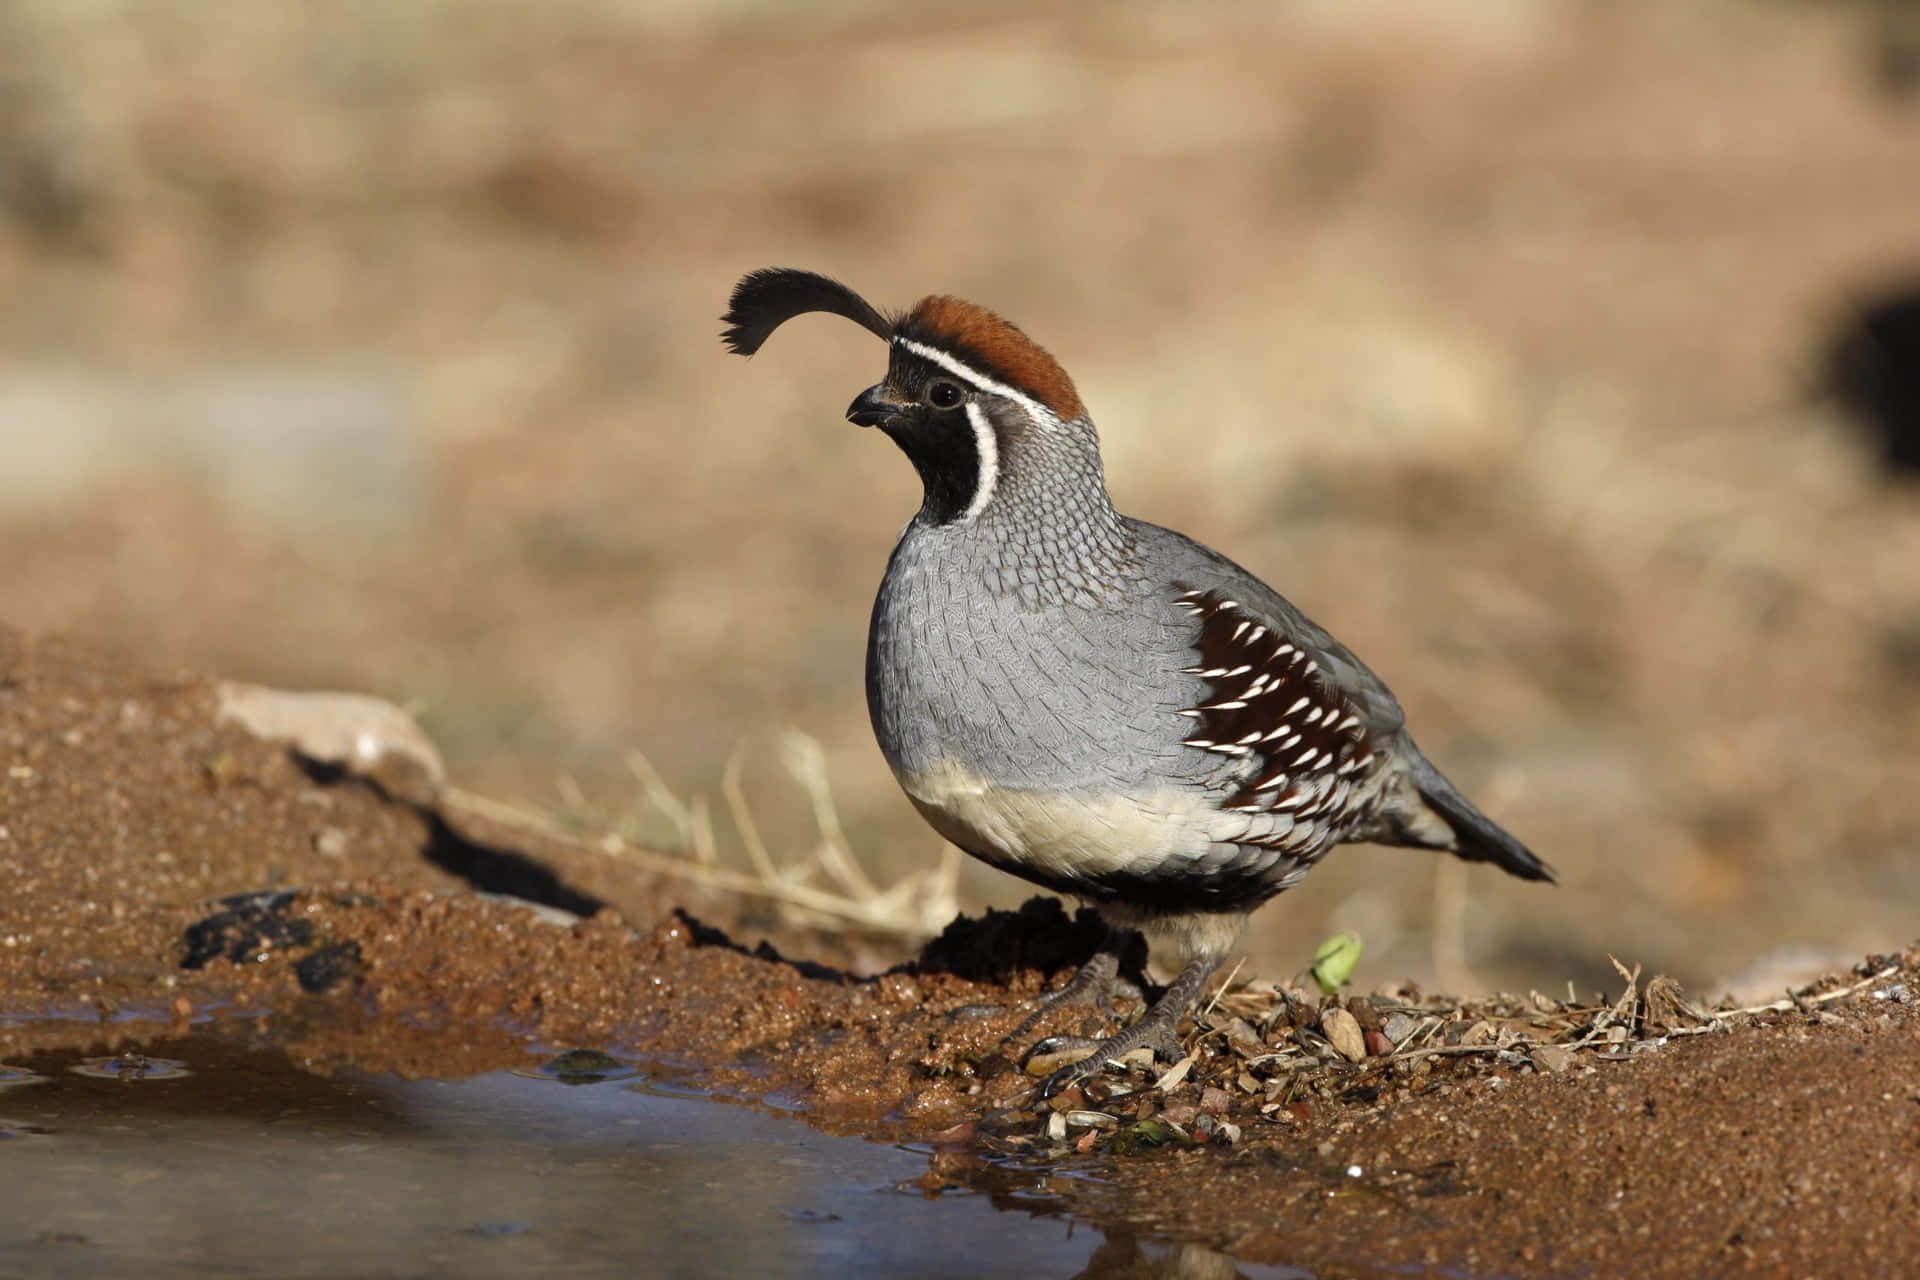 A beautiful quail bird perched on a branch in the wild.